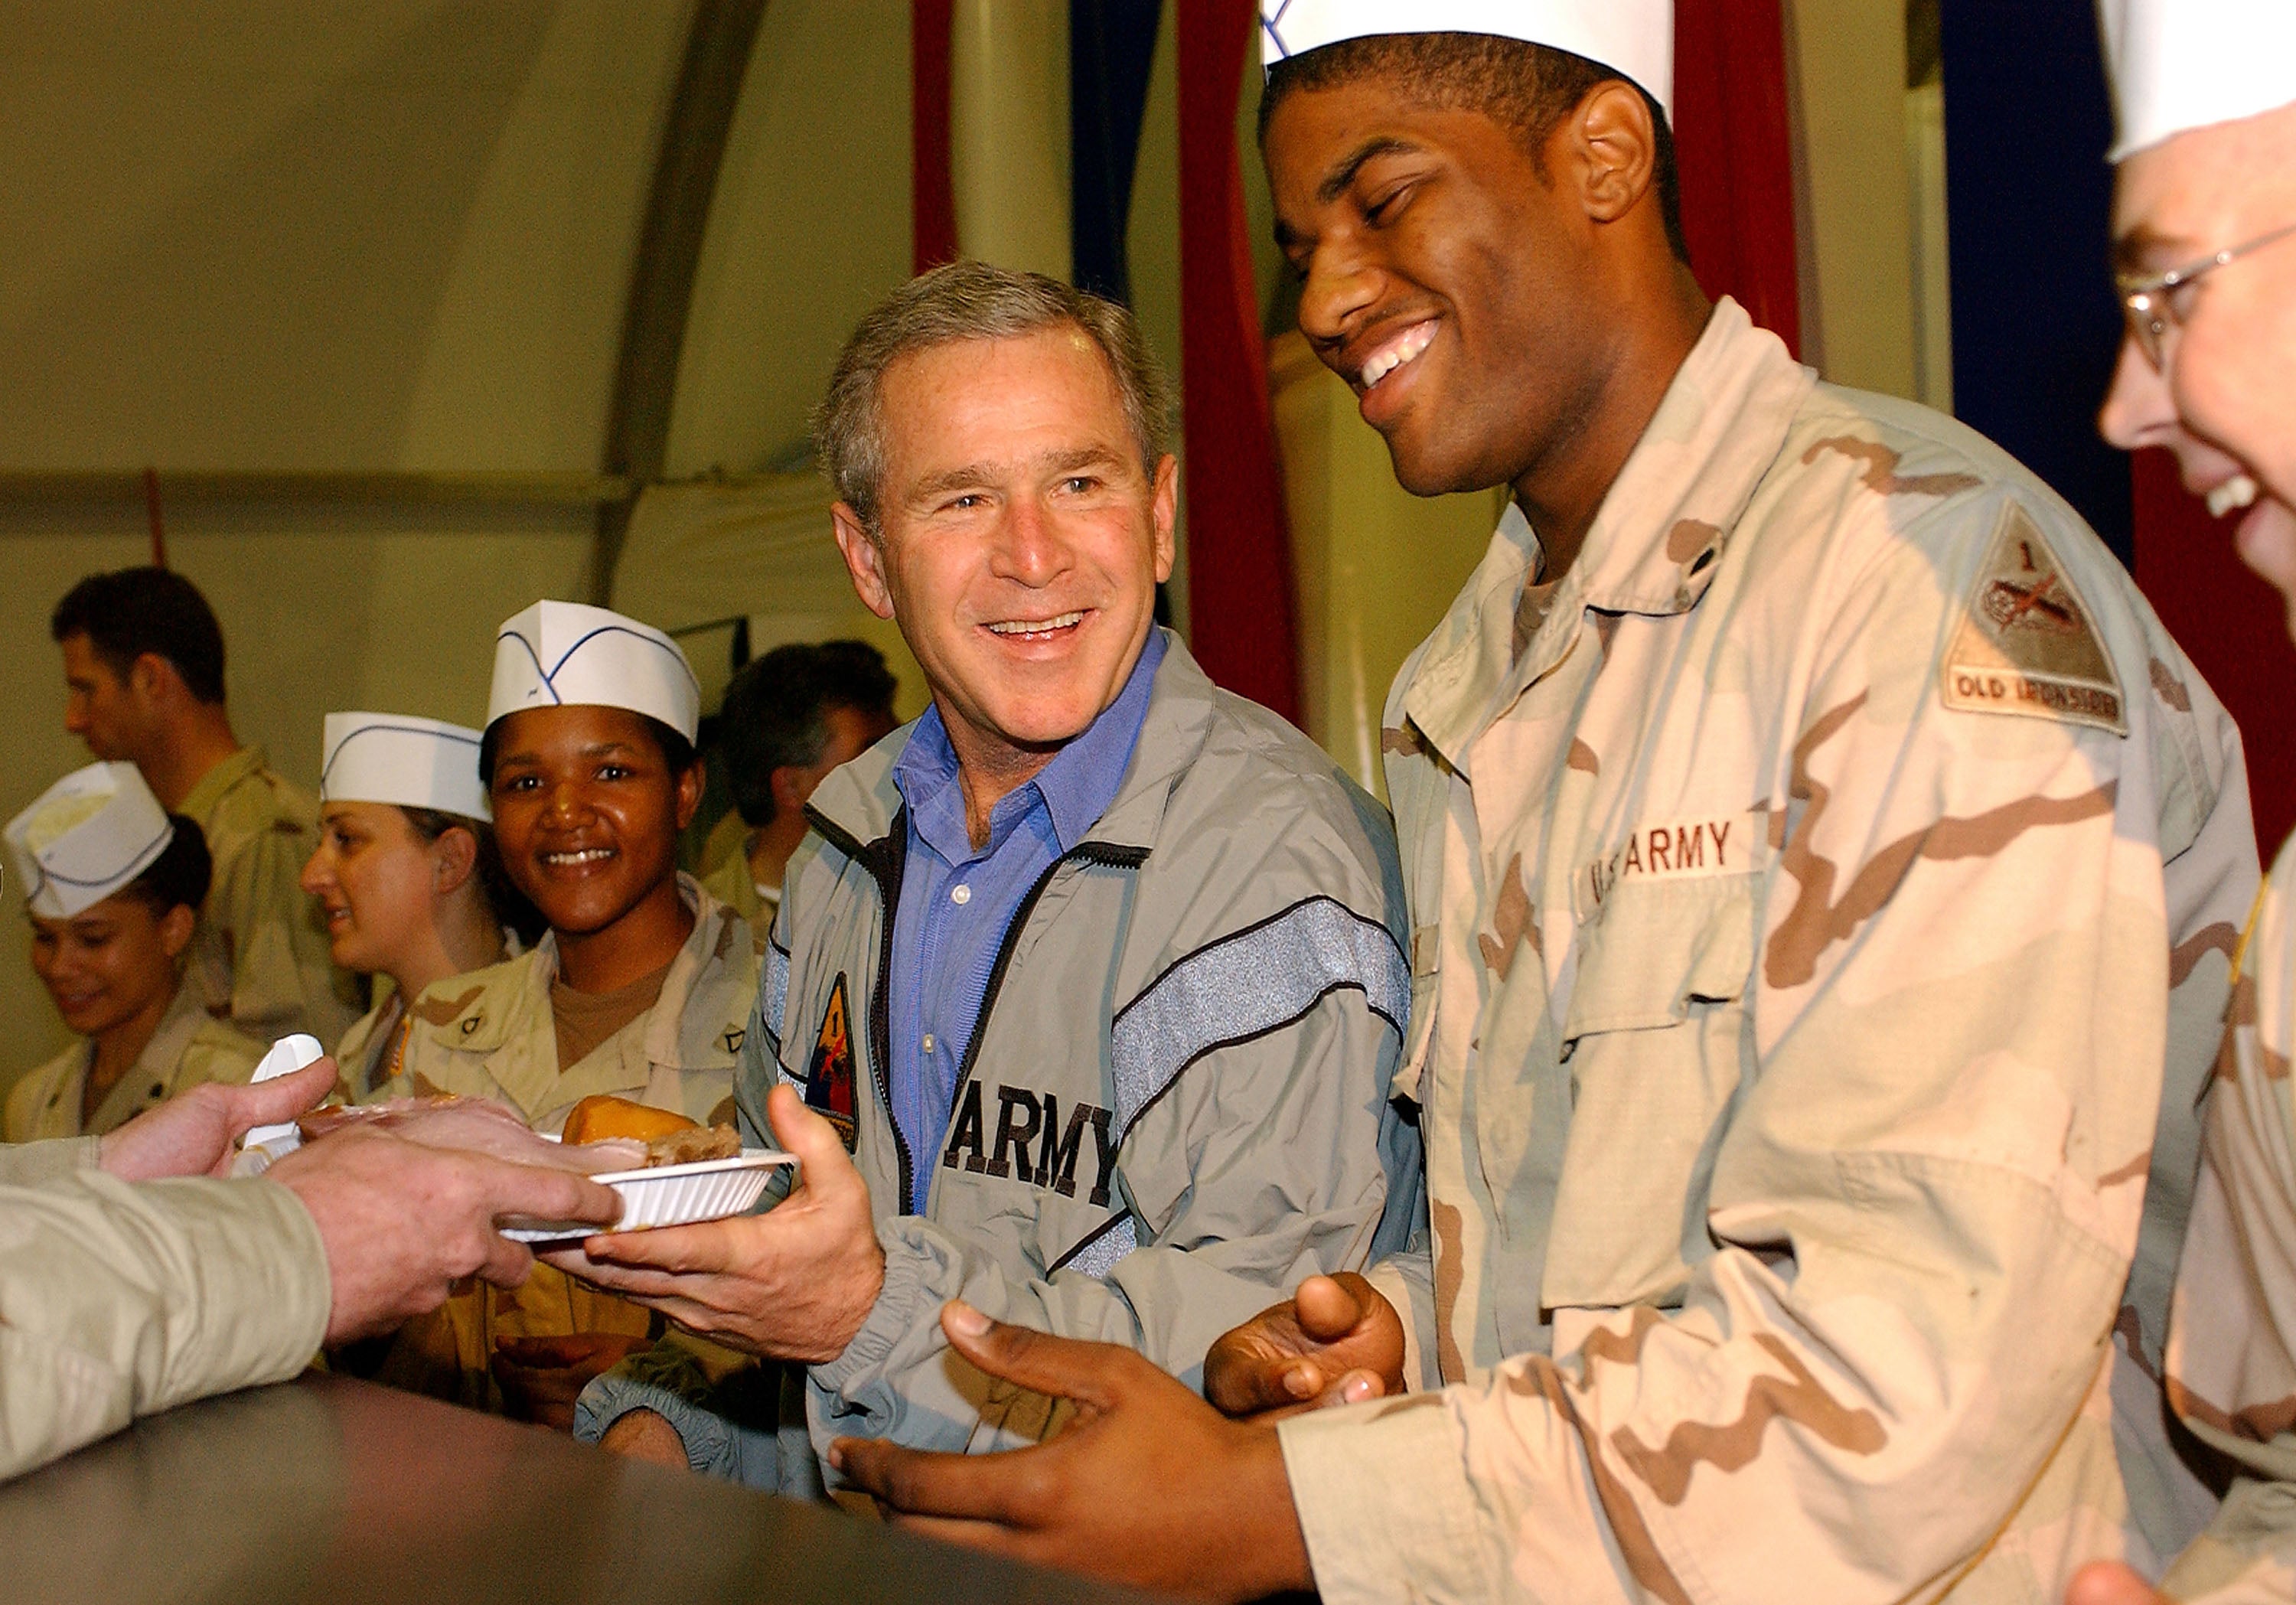 George W Bush paid a visit to US troops in Iraq in 2003 – one of many visits made by US presidents to war zones